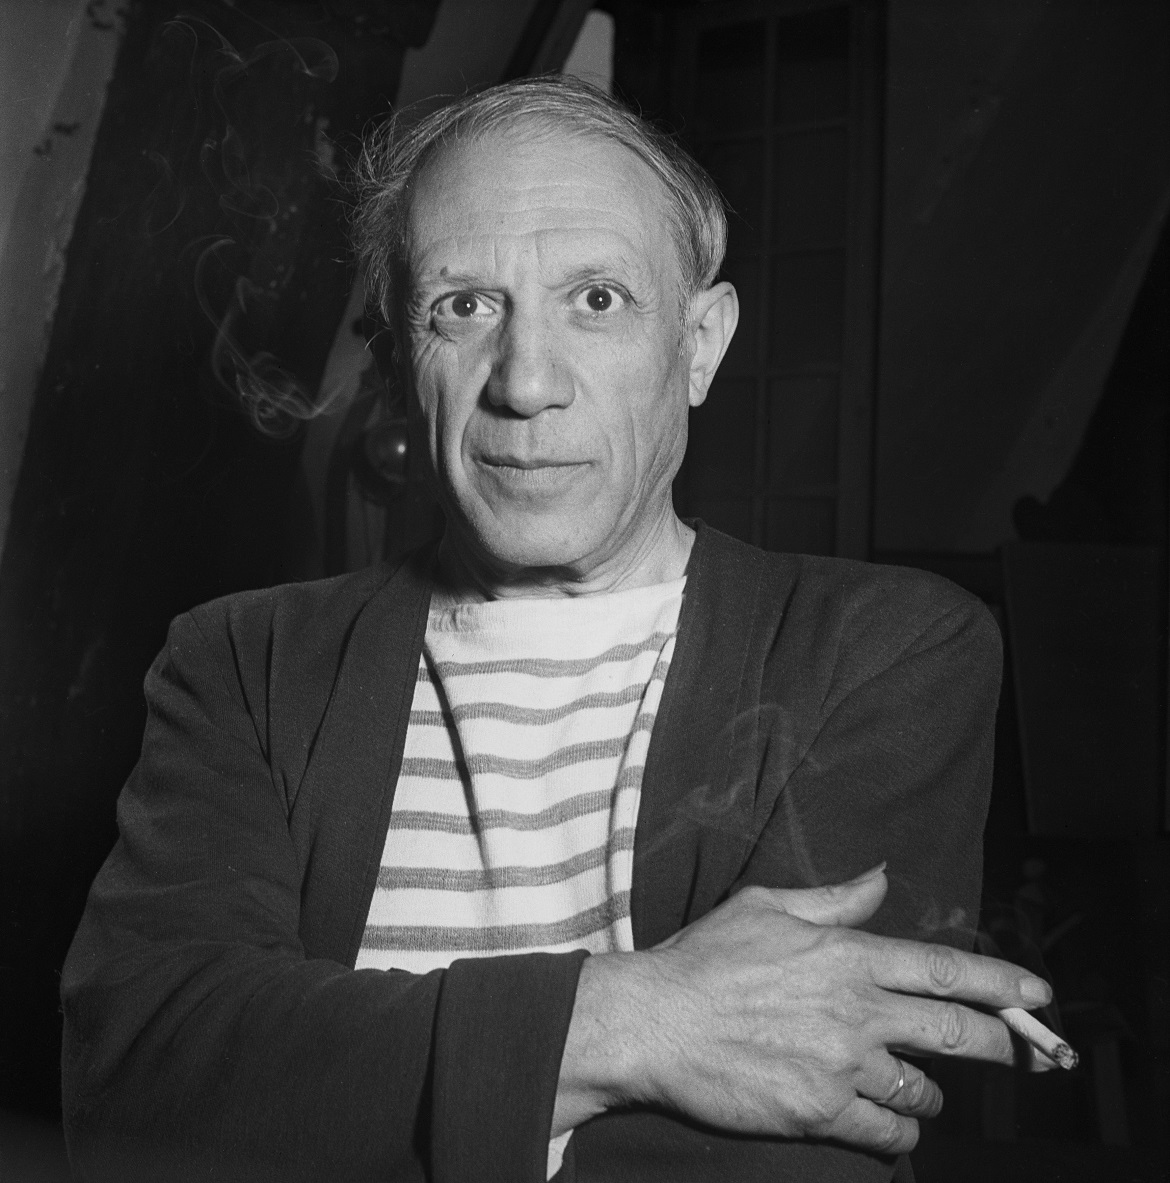 FRANCE. Paris. September, 1944. Pablo Picasso in his studio on rue Grands Augustins., Image: 467817033, License: Rights-managed, Restrictions: , Model Release: no, Credit line: Robert Capa © International Center of Photography / Magnum Photos / Profimedia